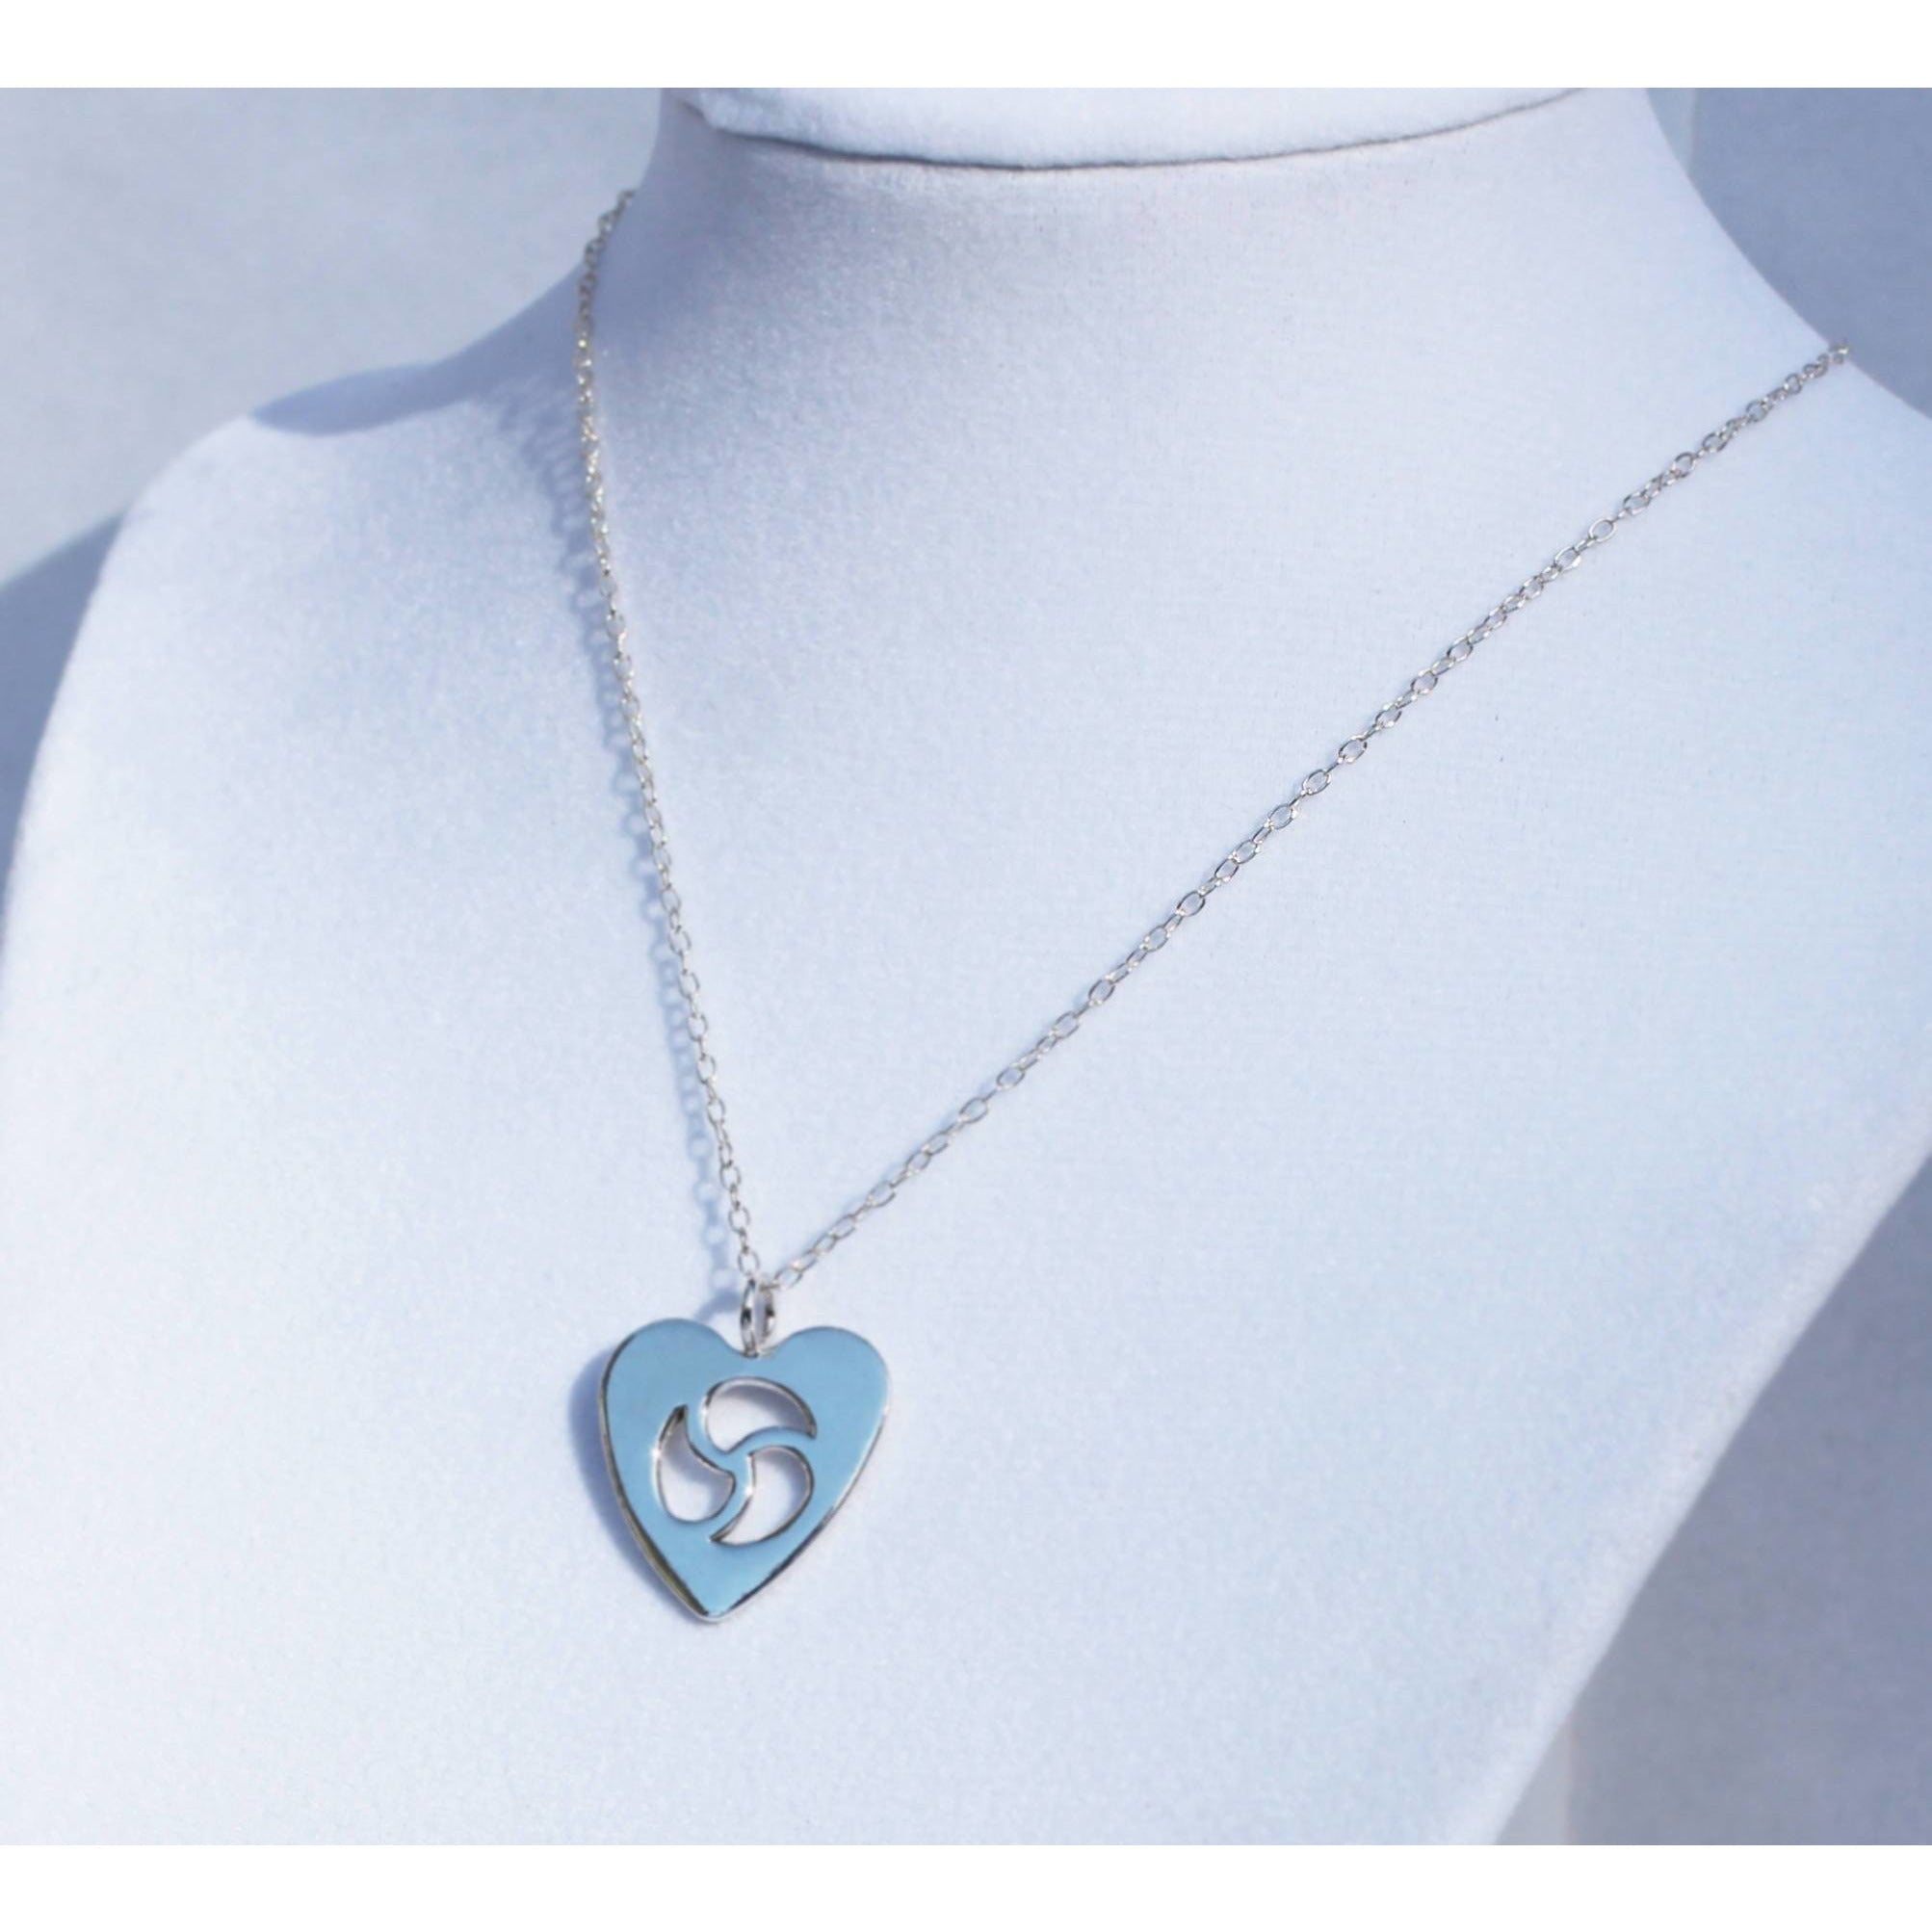 Discreet Sterling Silver Triskele Necklace - Handcrafted and Elegant for Daily or Special Occasion Wear